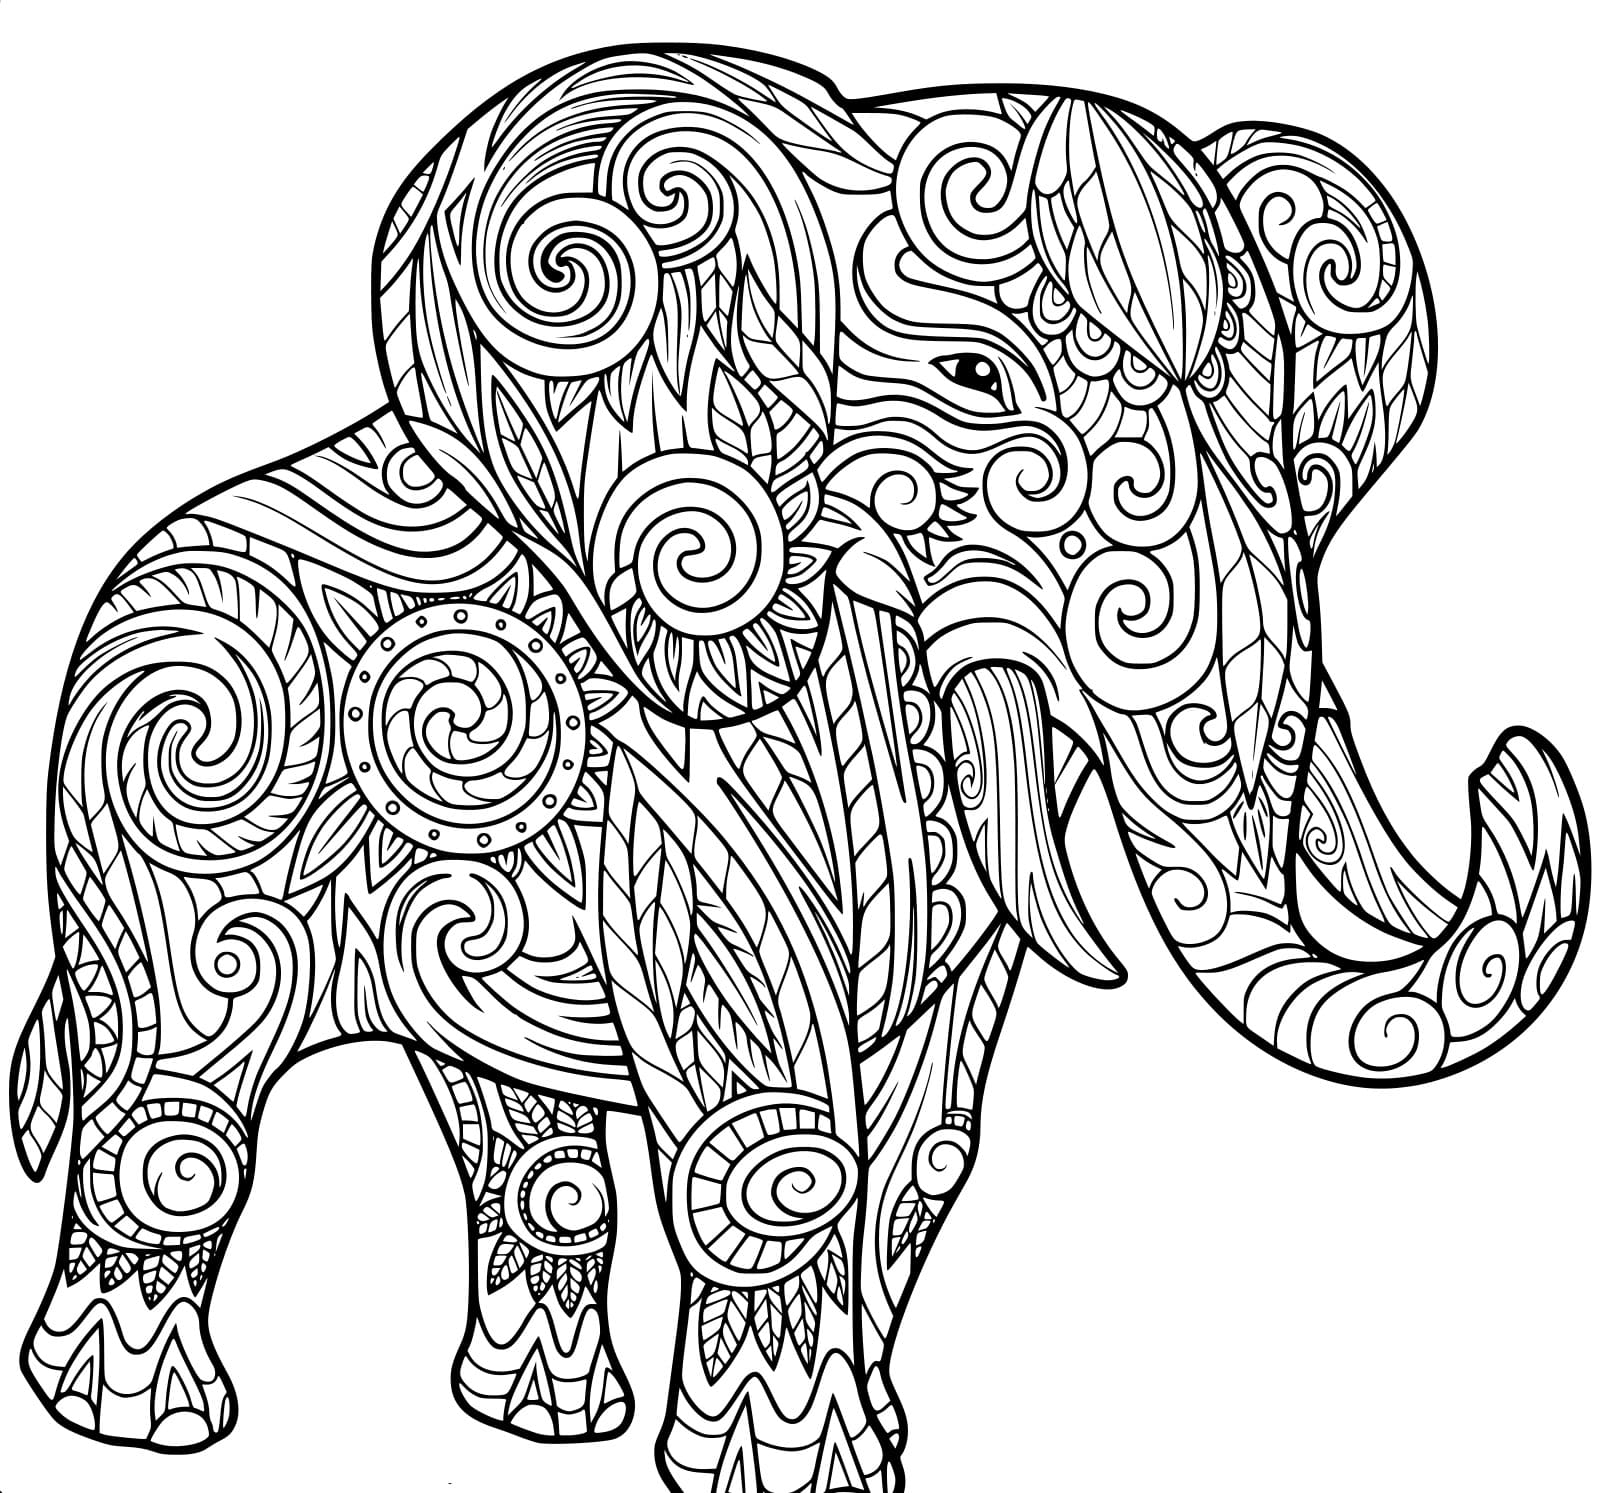 Animals Coloring Pages for Adults   20 Pictures Free Printable